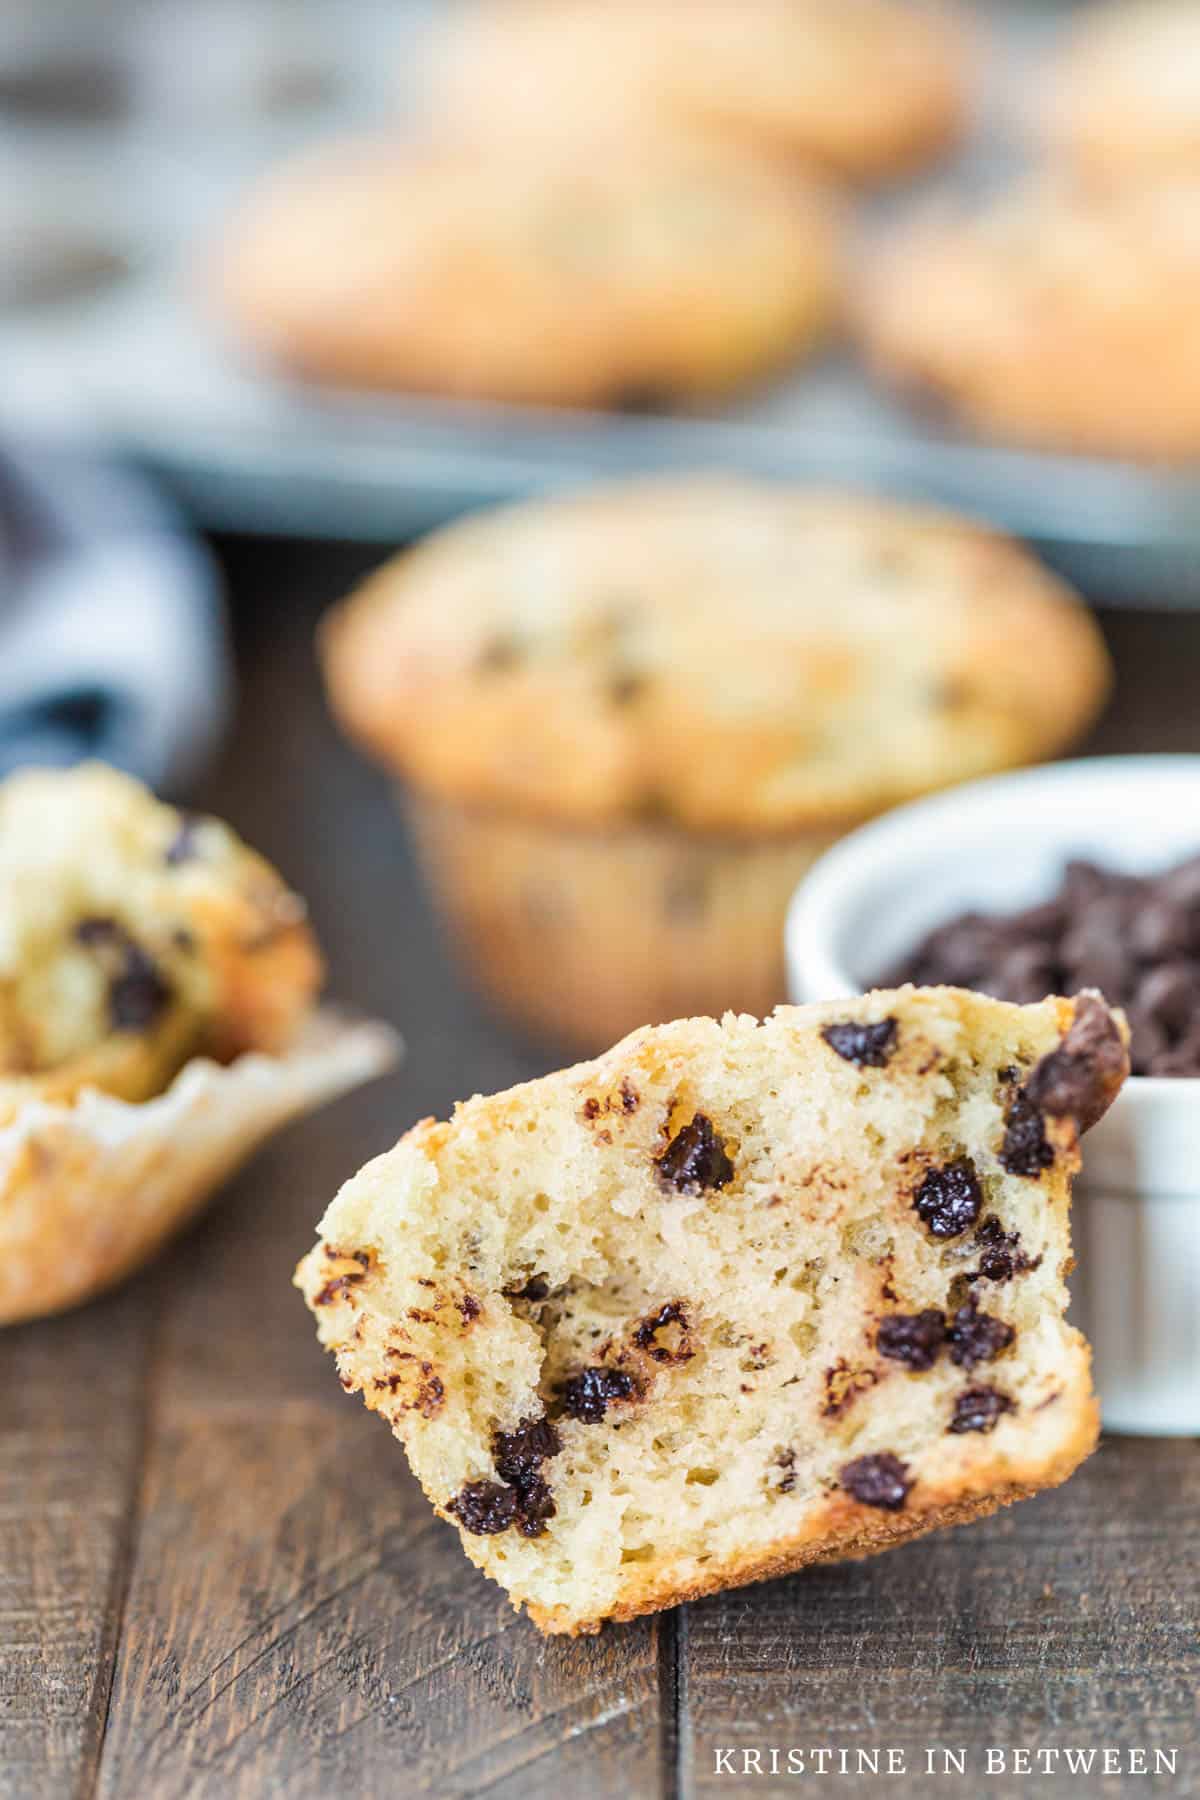 A muffin that's cut in half leaning up on a bowl of chocolate chips with more muffins in the background.